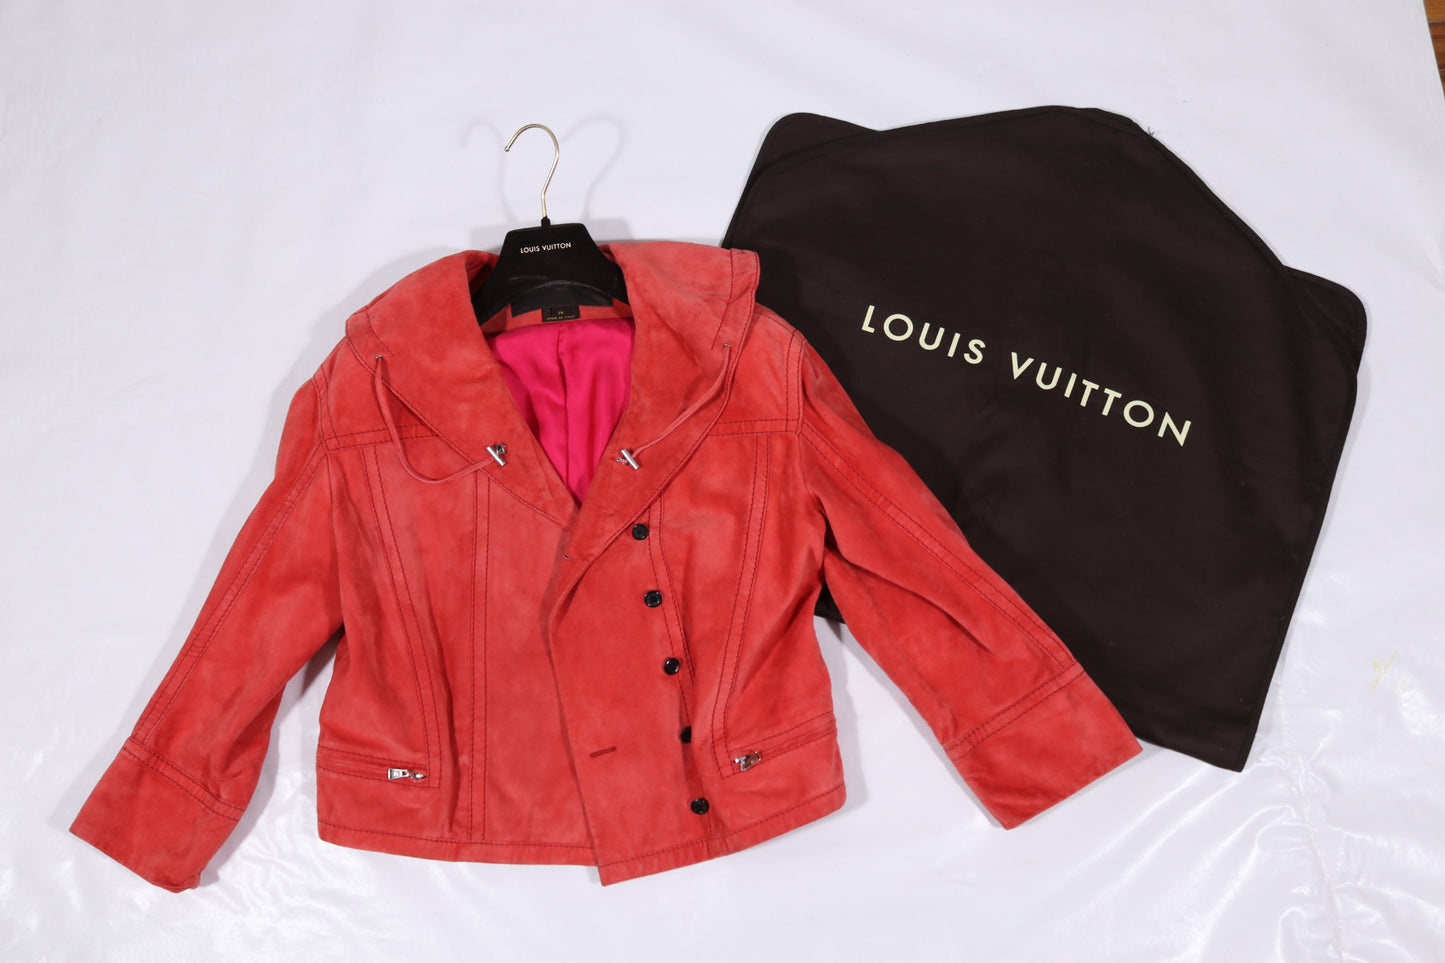 Louis Vuitton Calfskin Motorcycle Jacket Coral Suede Leather